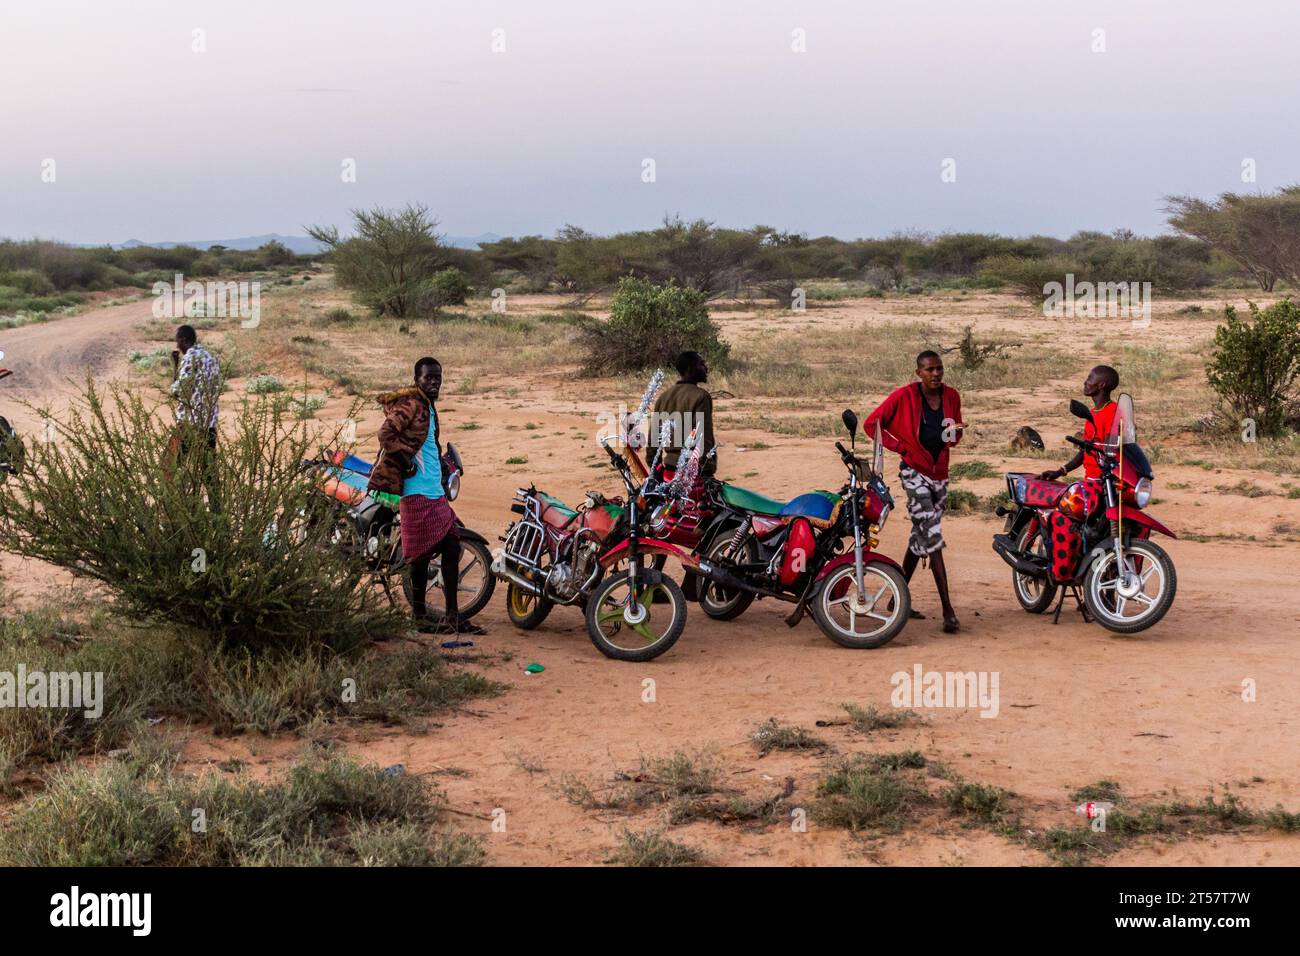 SOUTH HORR, KENYA - FEBRUARY 11, 2020: Moto Taxi drivers waiting in a desert near South Horr in northern Kenya Stock Photo